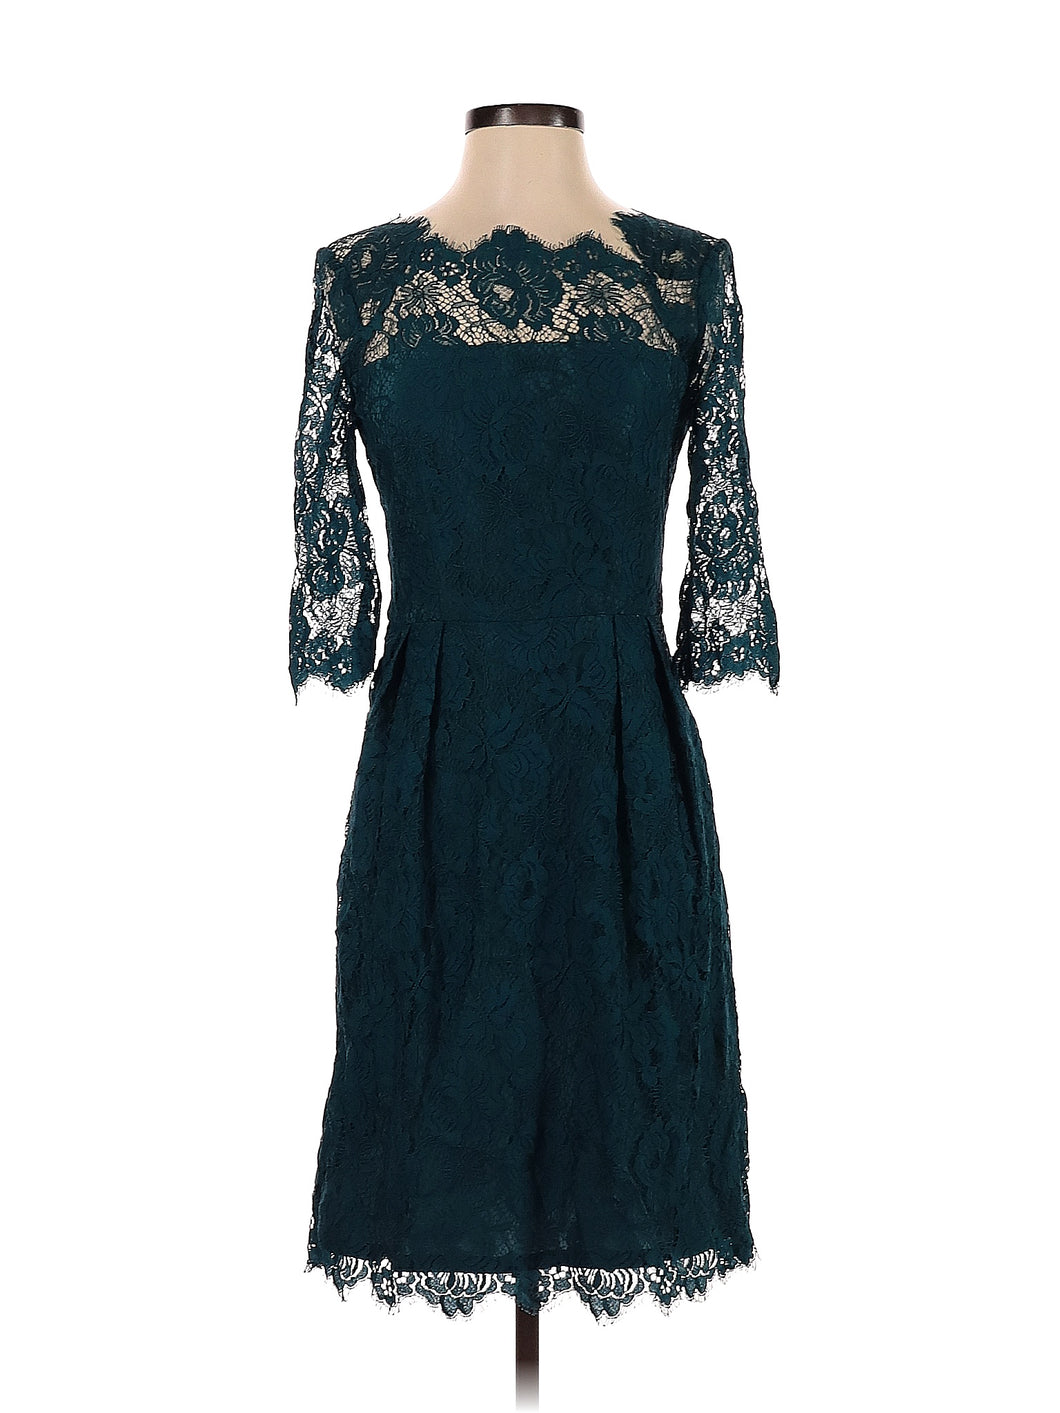 Thrifted Teal Lace Milly of New York Dress - 4